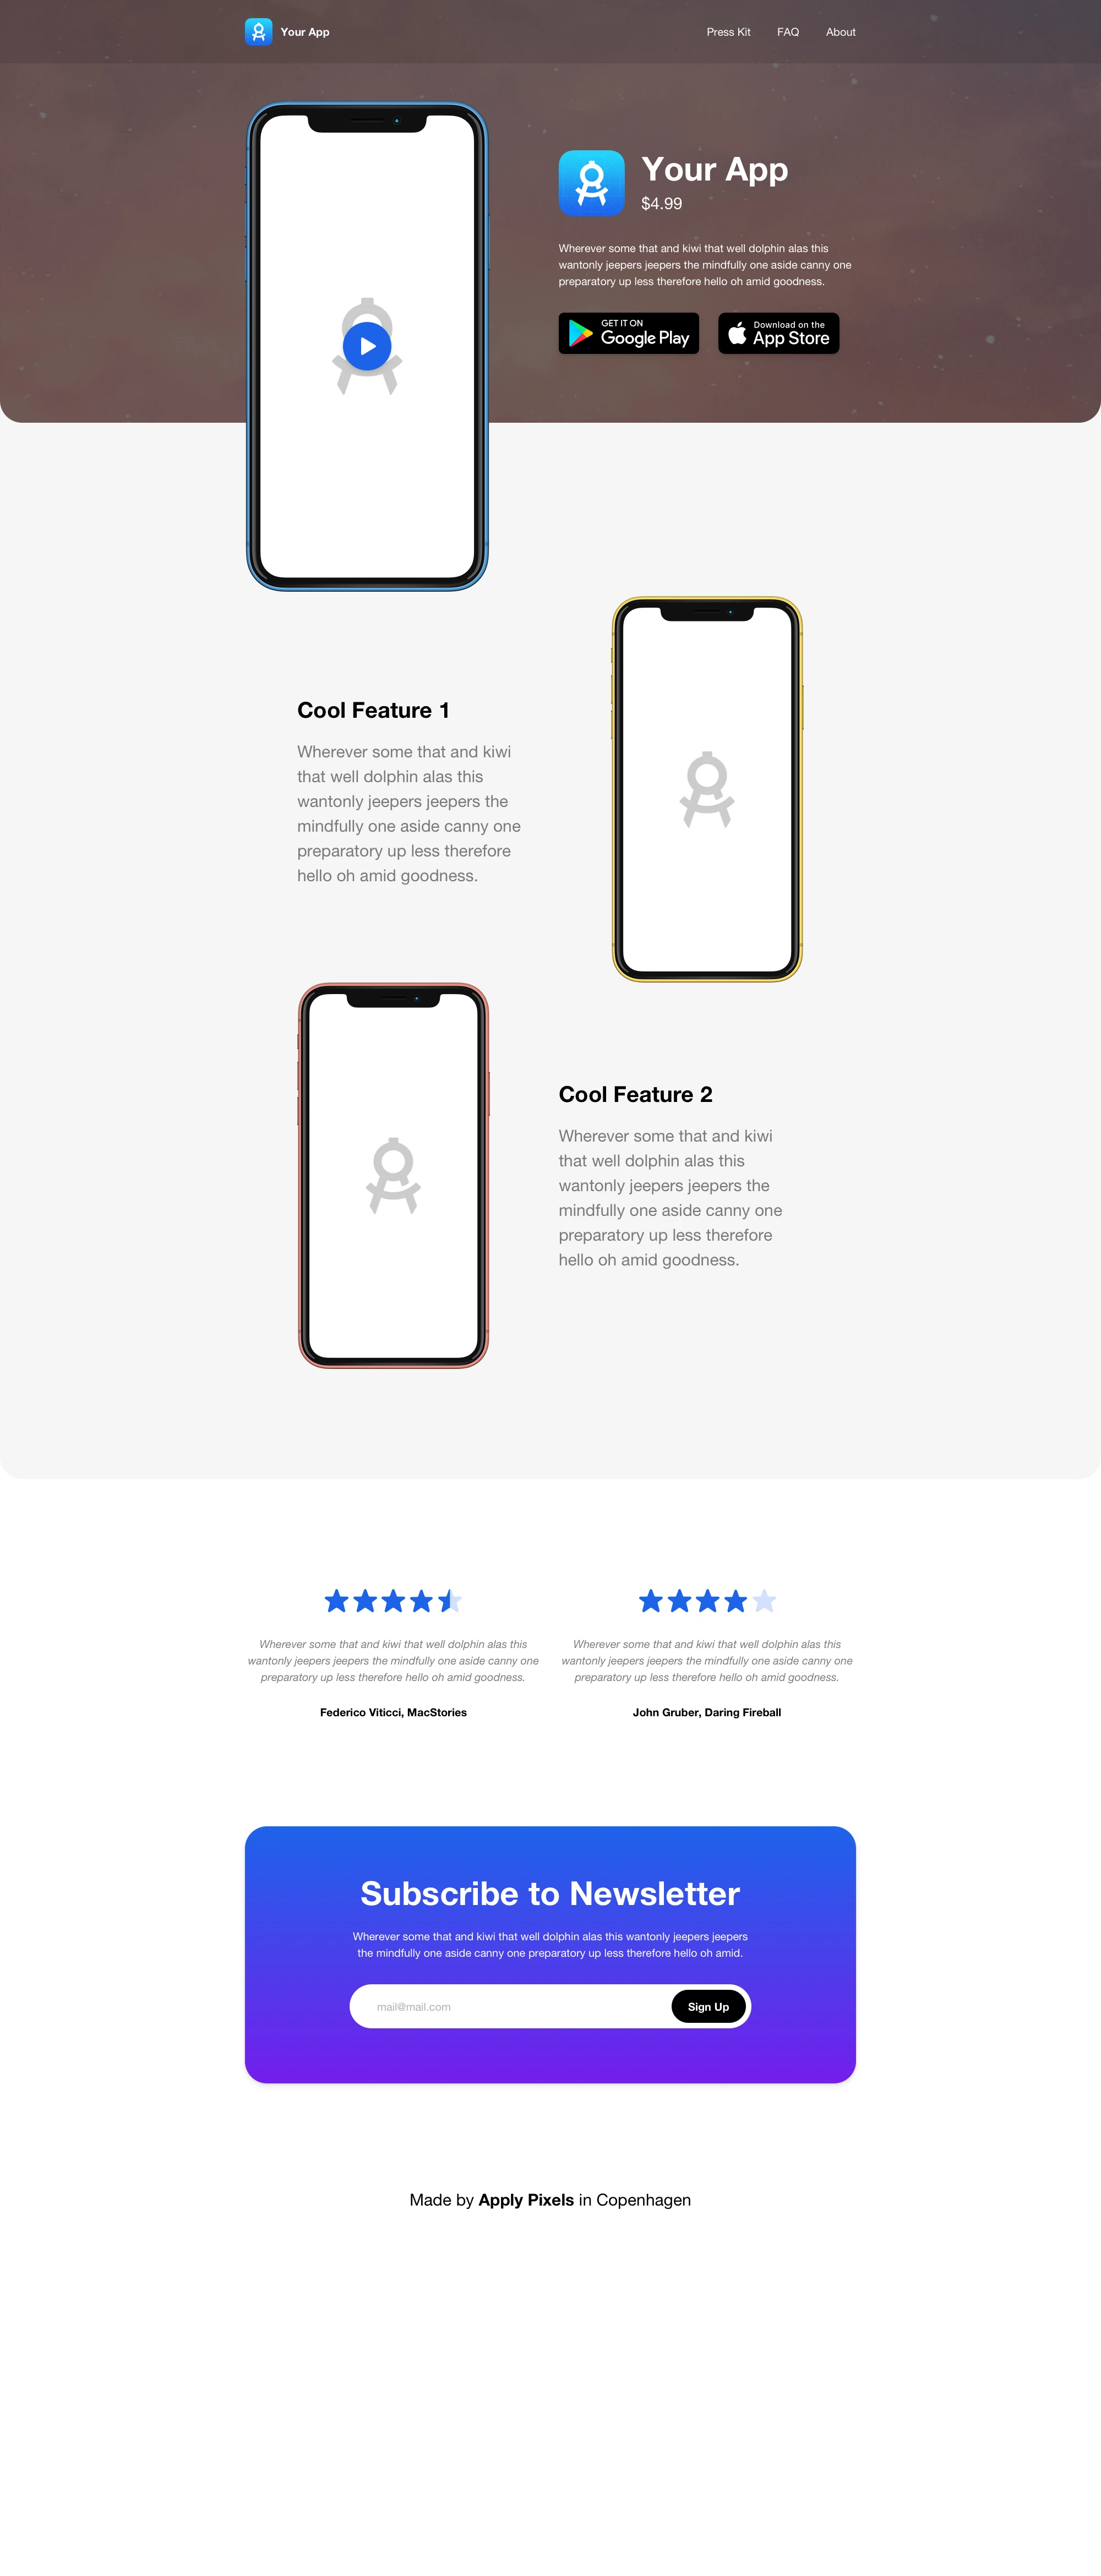 Mobile App Landing Page for Sketch - This is a Mobile App Landing Page design template for presenting mobile apps on the Internet. Use it to design a nice landing page for your own app, or use it to present your clients’ apps. Easily change the app icon, device screenshots and header background image via the Sketch Symbols and Overrides. Use the design as it is, or customise for your apps brand by changing colors, fonts and more. The template is designed for the Bootstrap 4 Grid System, which is also included. It includes two responsive designs: one for desktop and one for mobile. 